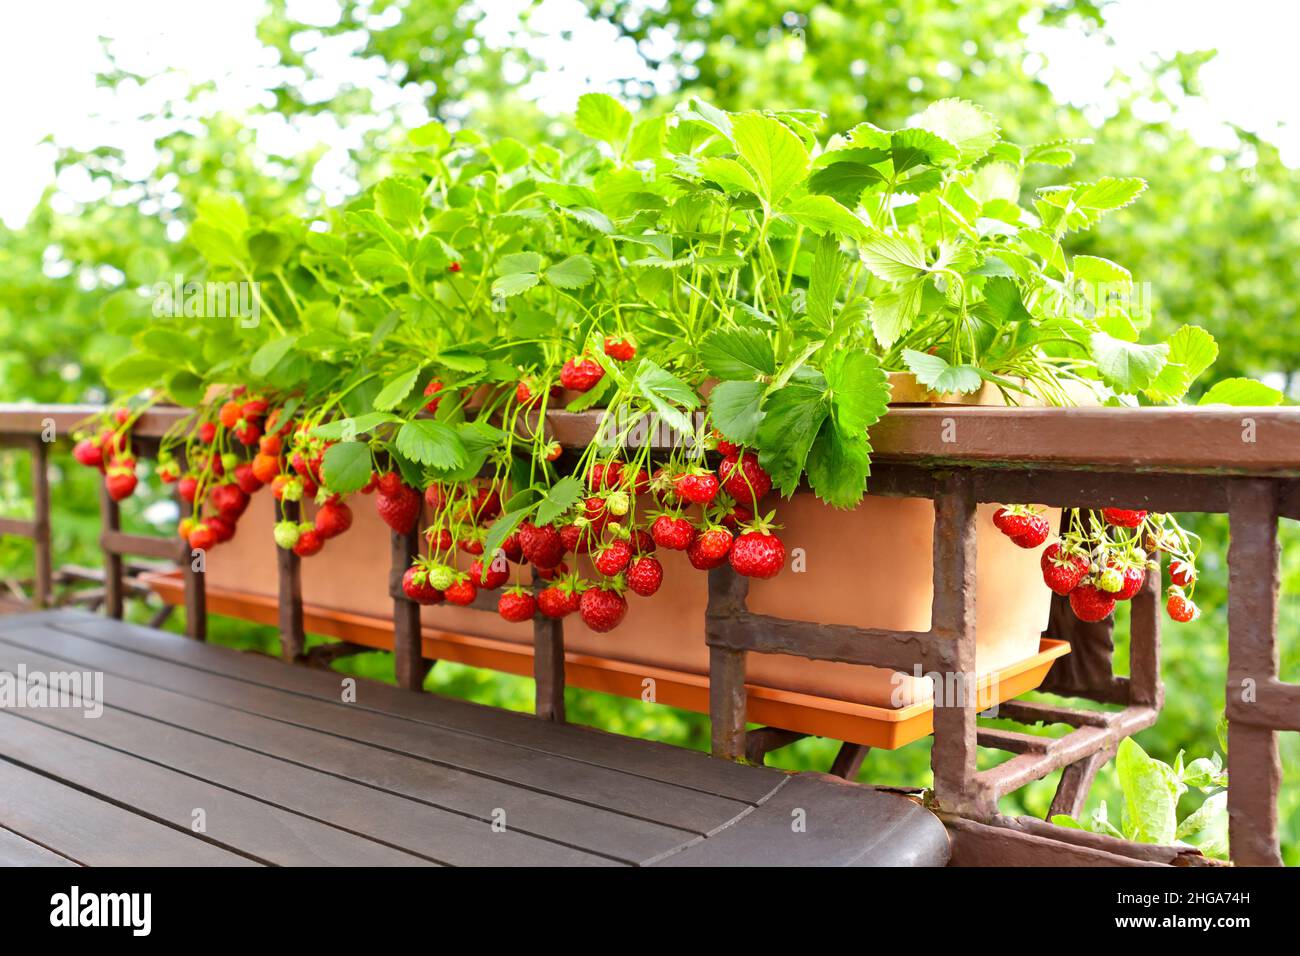 Strawberry plants with lots of ripe red strawberries in a balcony railing planter, apartment or urban gardening concept. Stock Photo